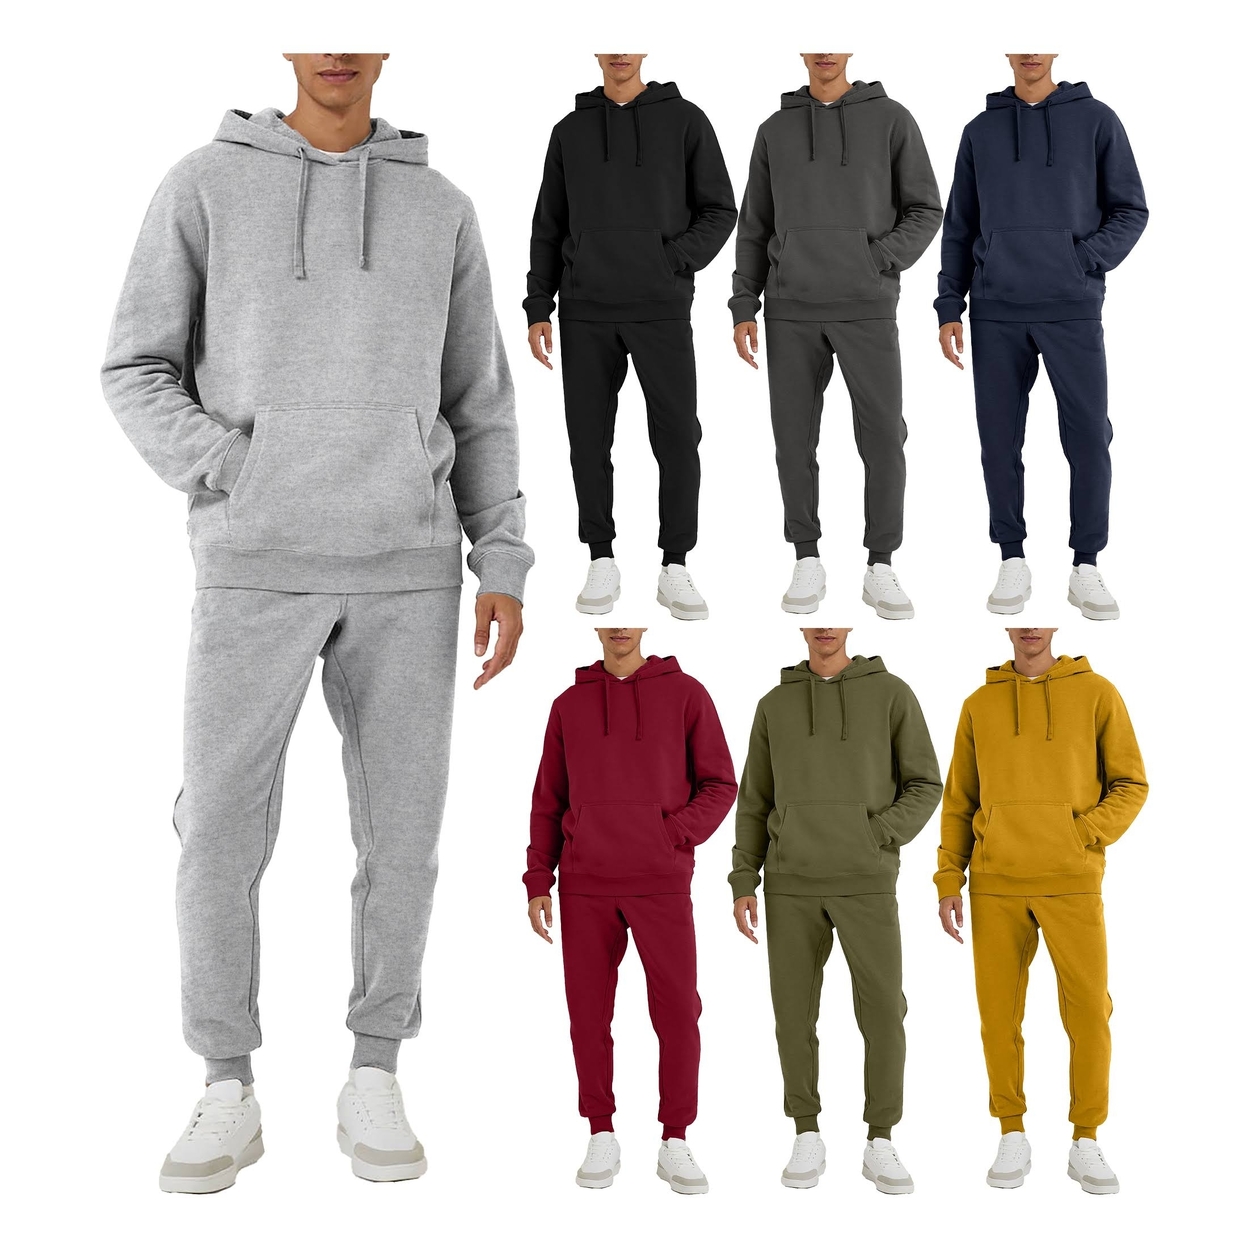 2-Pack: Men's Big & Tall Athletic Active Jogging Winter Warm Fleece Lined Pullover Tracksuit Set - Grey, 3xl